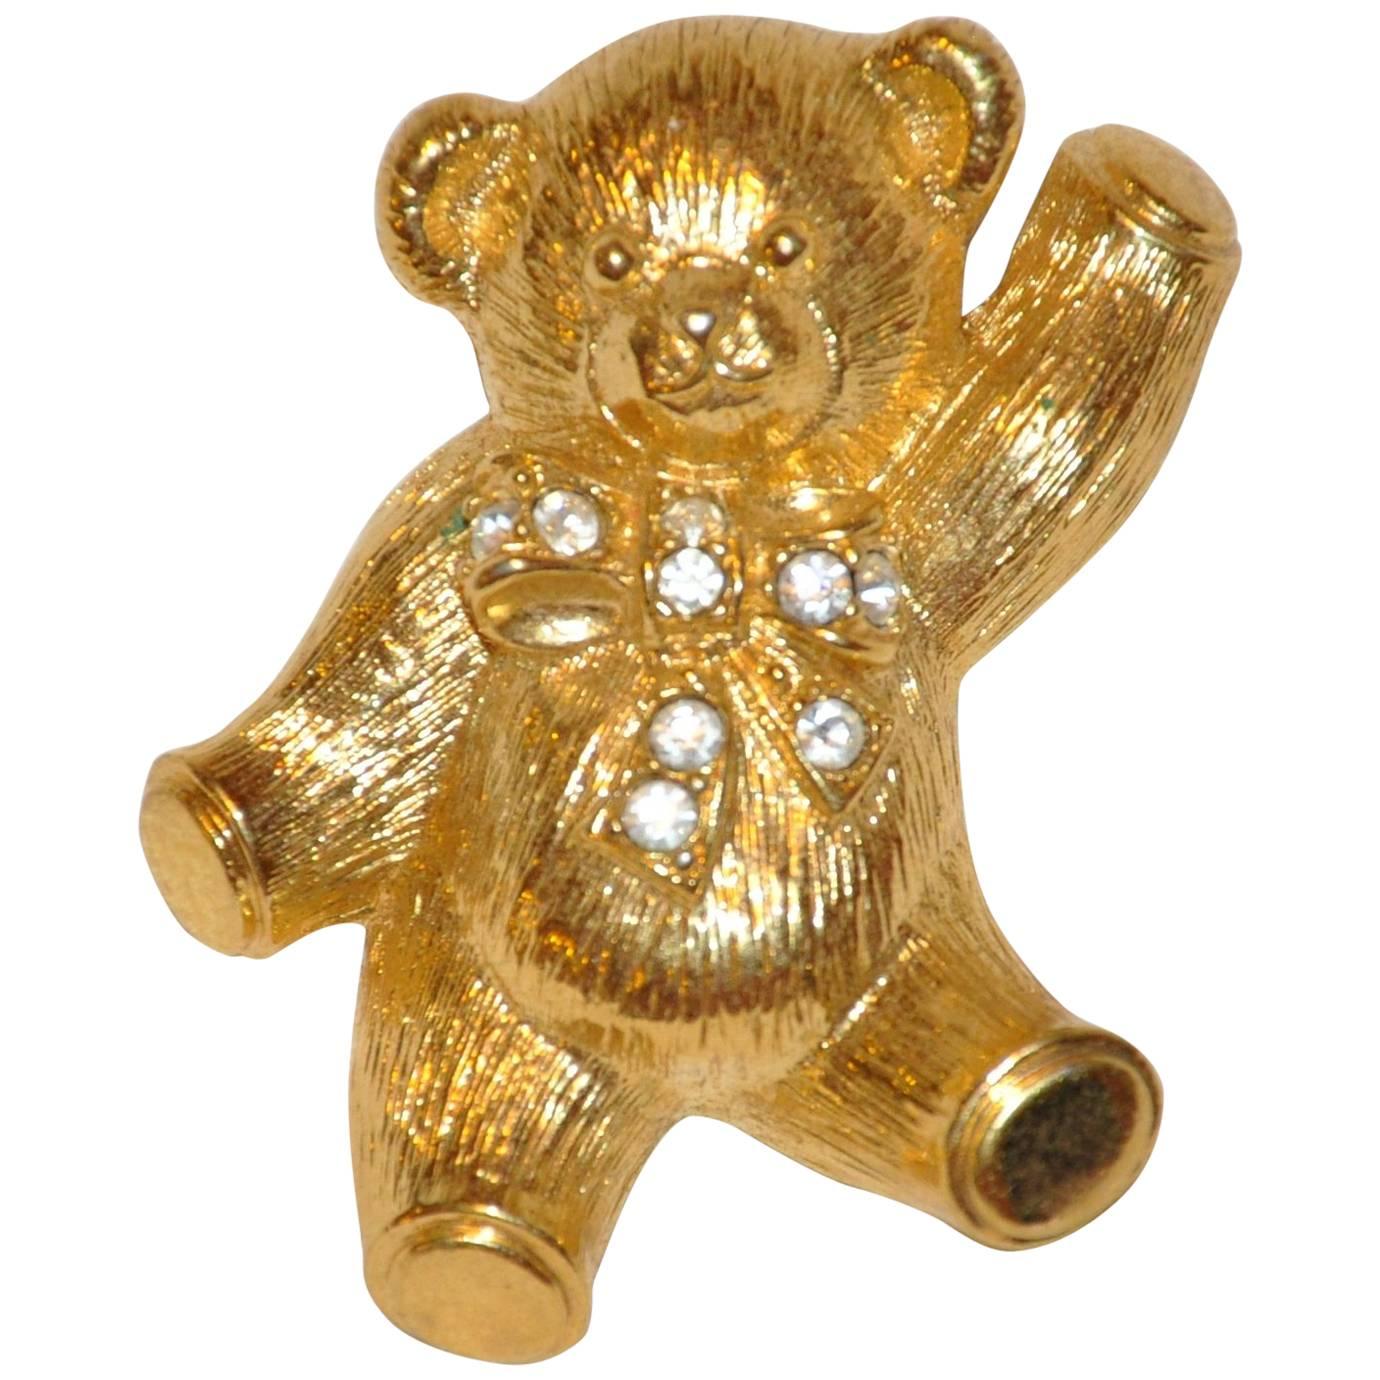 Large Whimsical Polished Gilded Gold Vermeil "Teddy" Brooch & Pendant For Sale